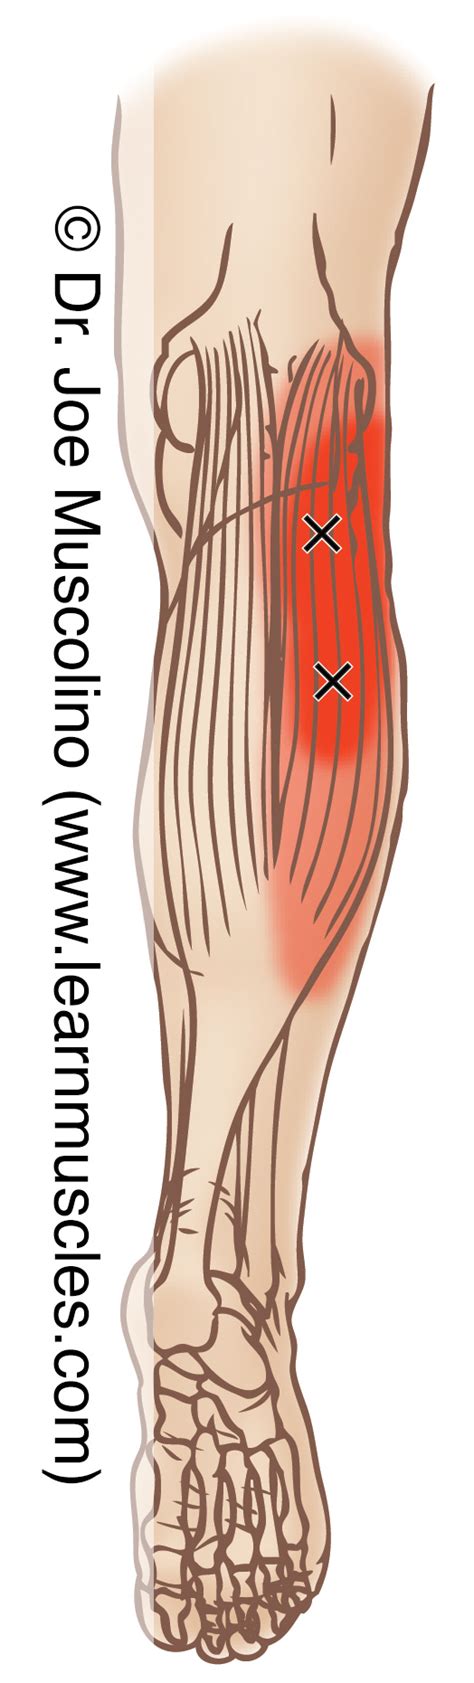 Gastrocnemius Trigger Points Learn Muscles